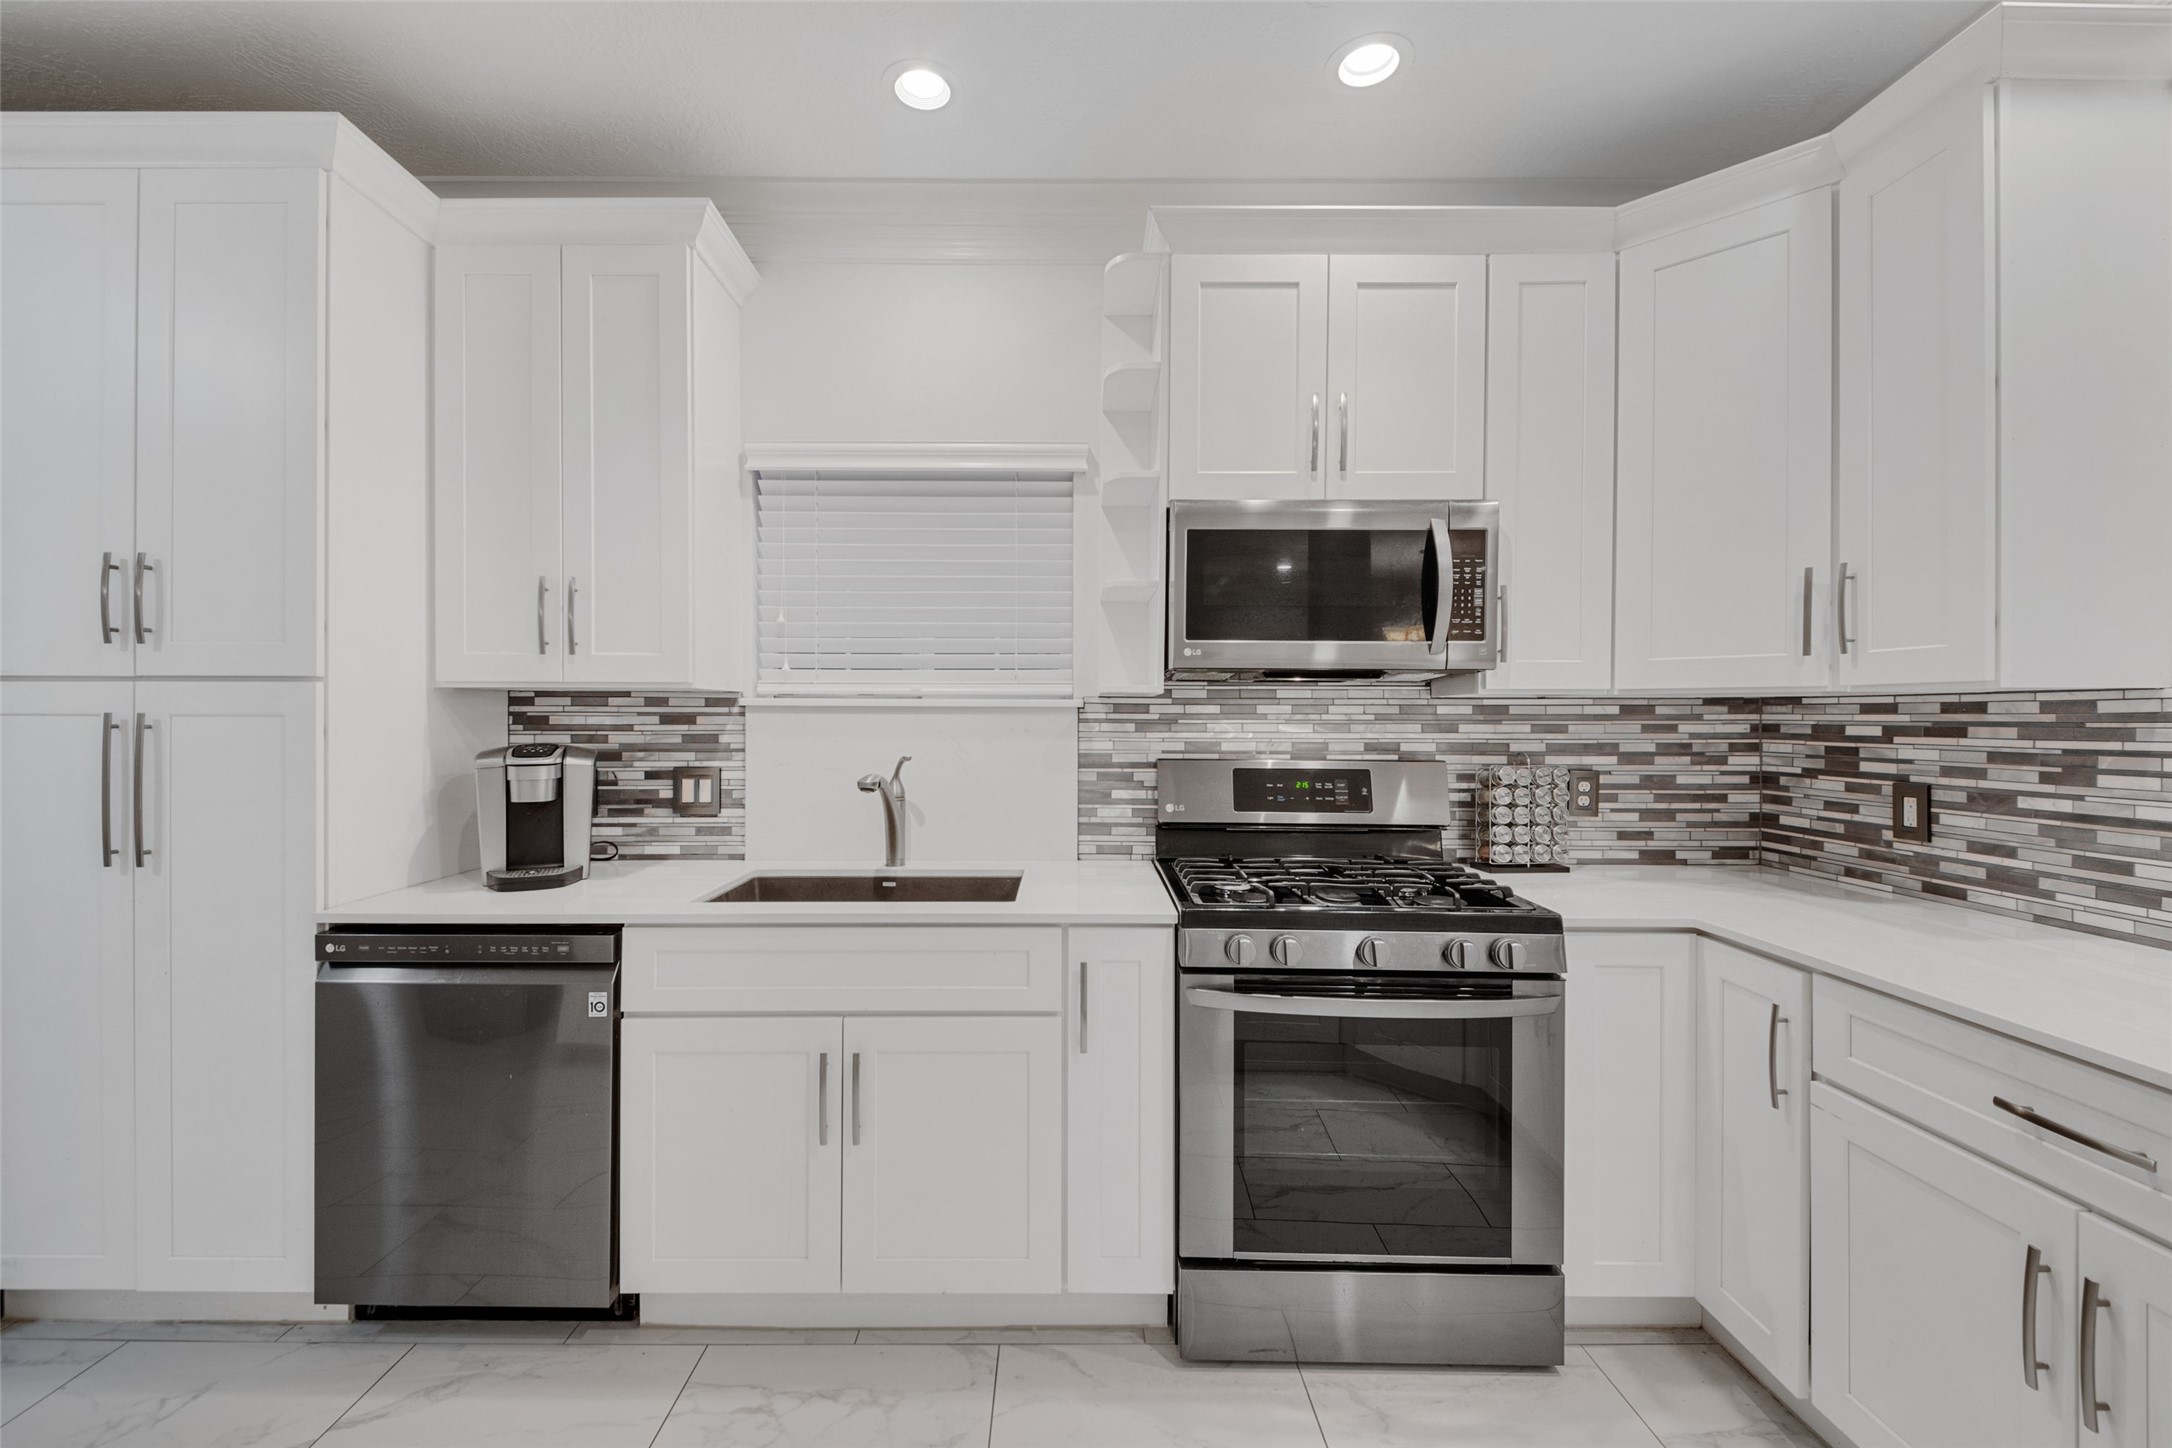 This thoughtfully constructed kitchen, complete with pantry space, will satisfy any cook's needs.